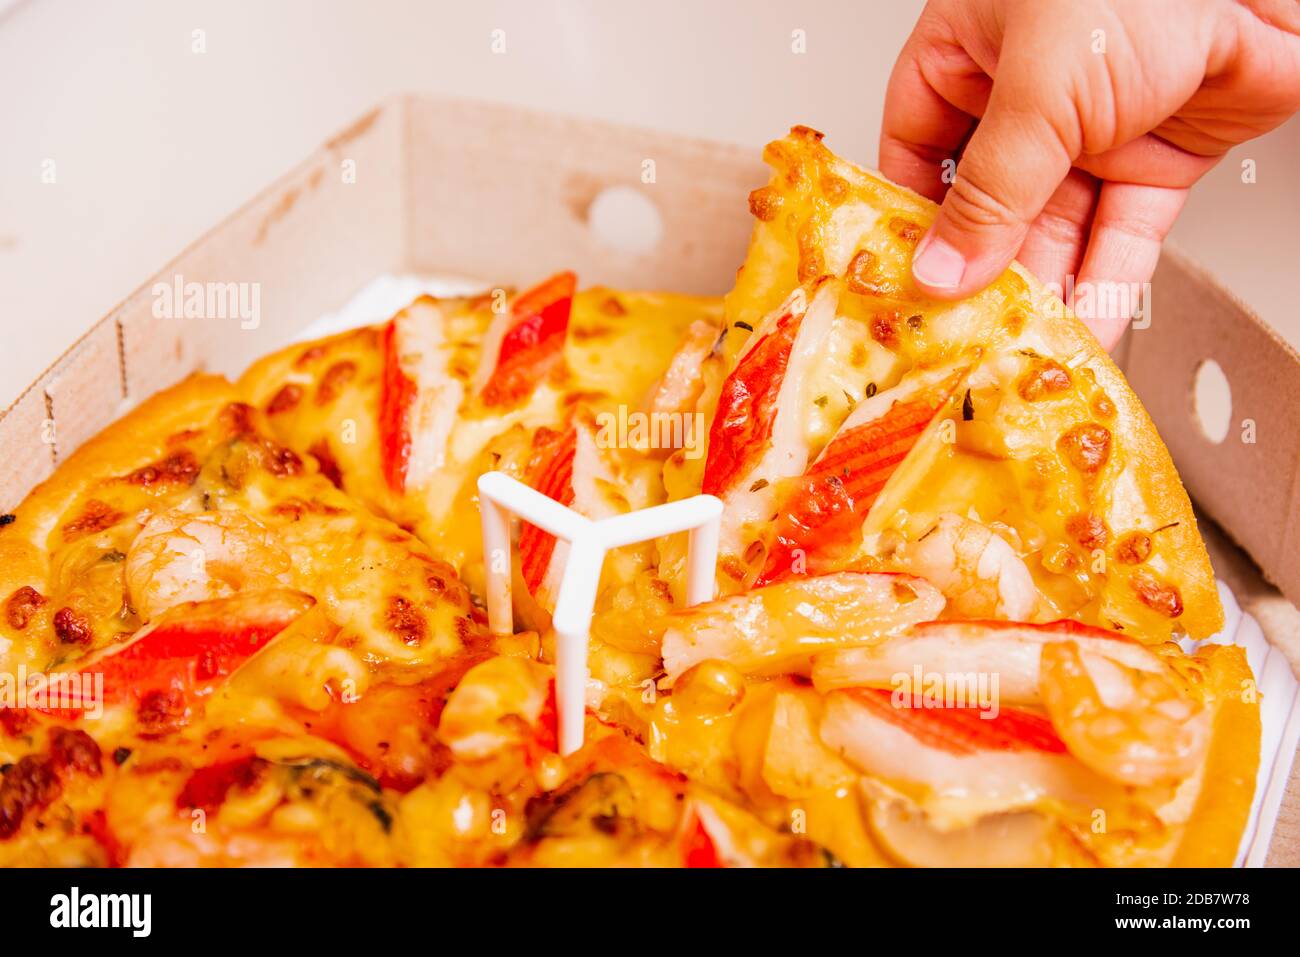 Hot Homemade, Vegetarian fast Italian food, Hand of Little Child holding Delivery Pizza pepperoni, cheese many slices in an open cardboard box Stock Photo